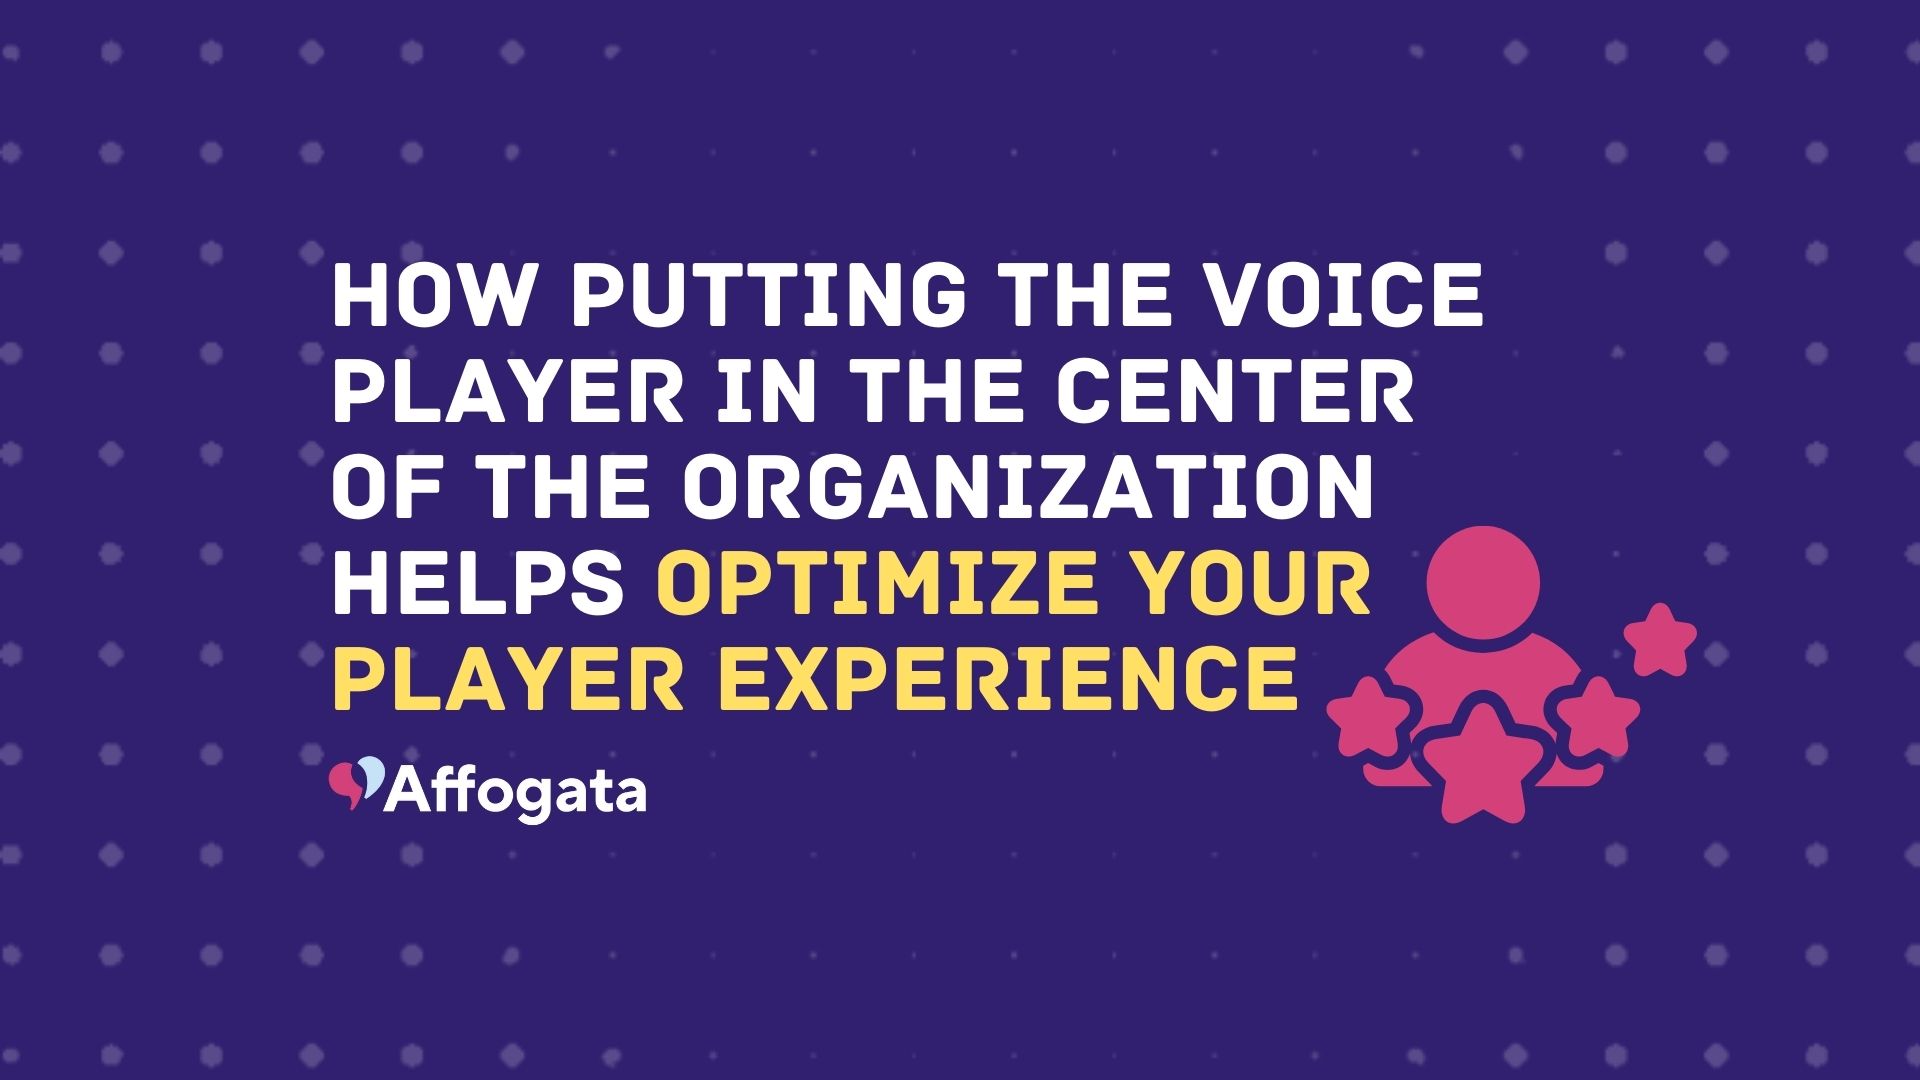 How putting the player voice in the center of the organization helps optimize your player experience